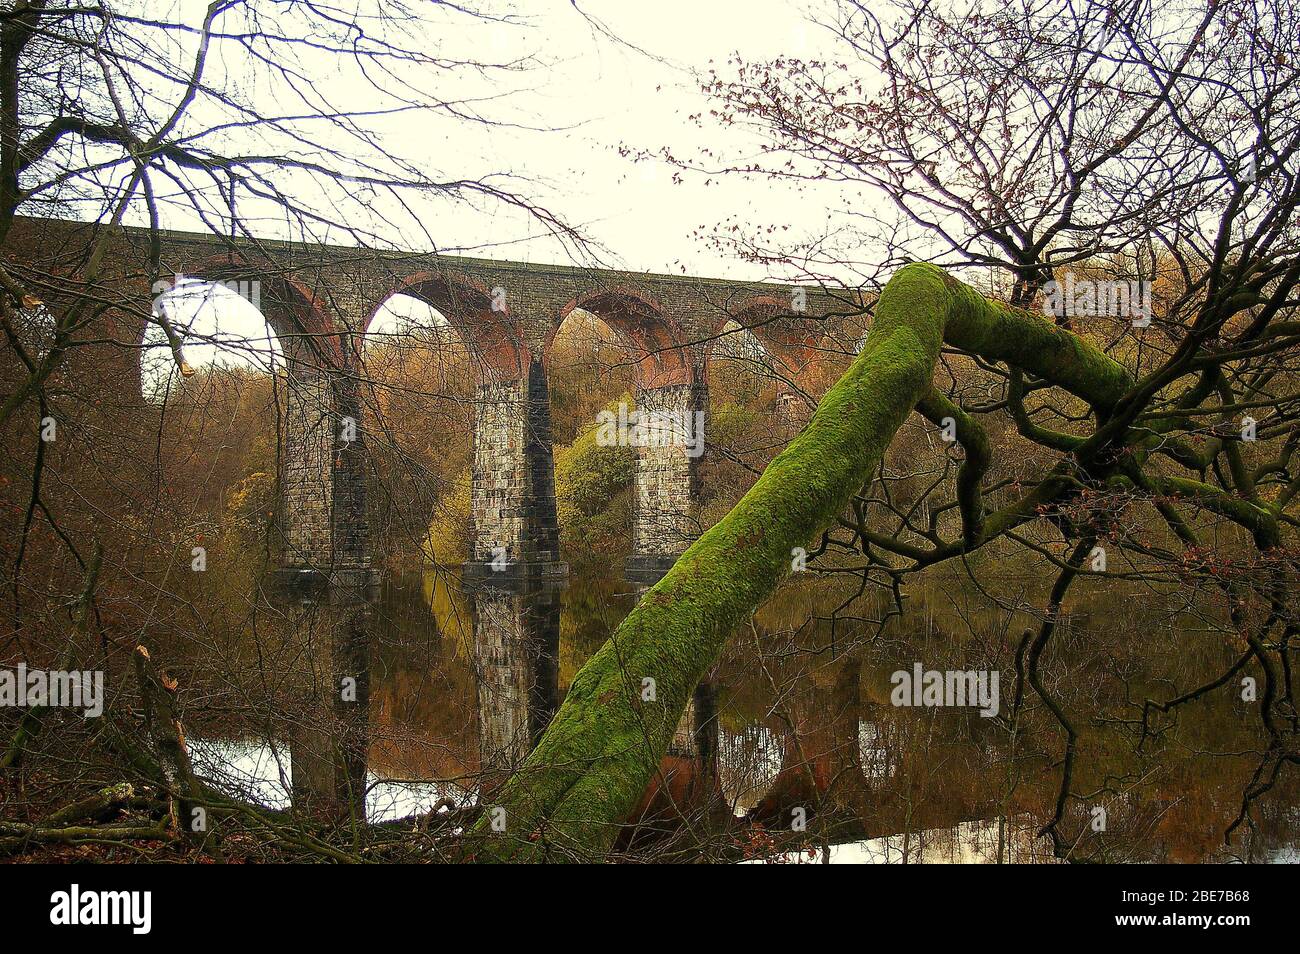 Moss-covered branch reaching out over a reservoir in Lanchashire with a tall railway arch bridge in the background Stock Photo